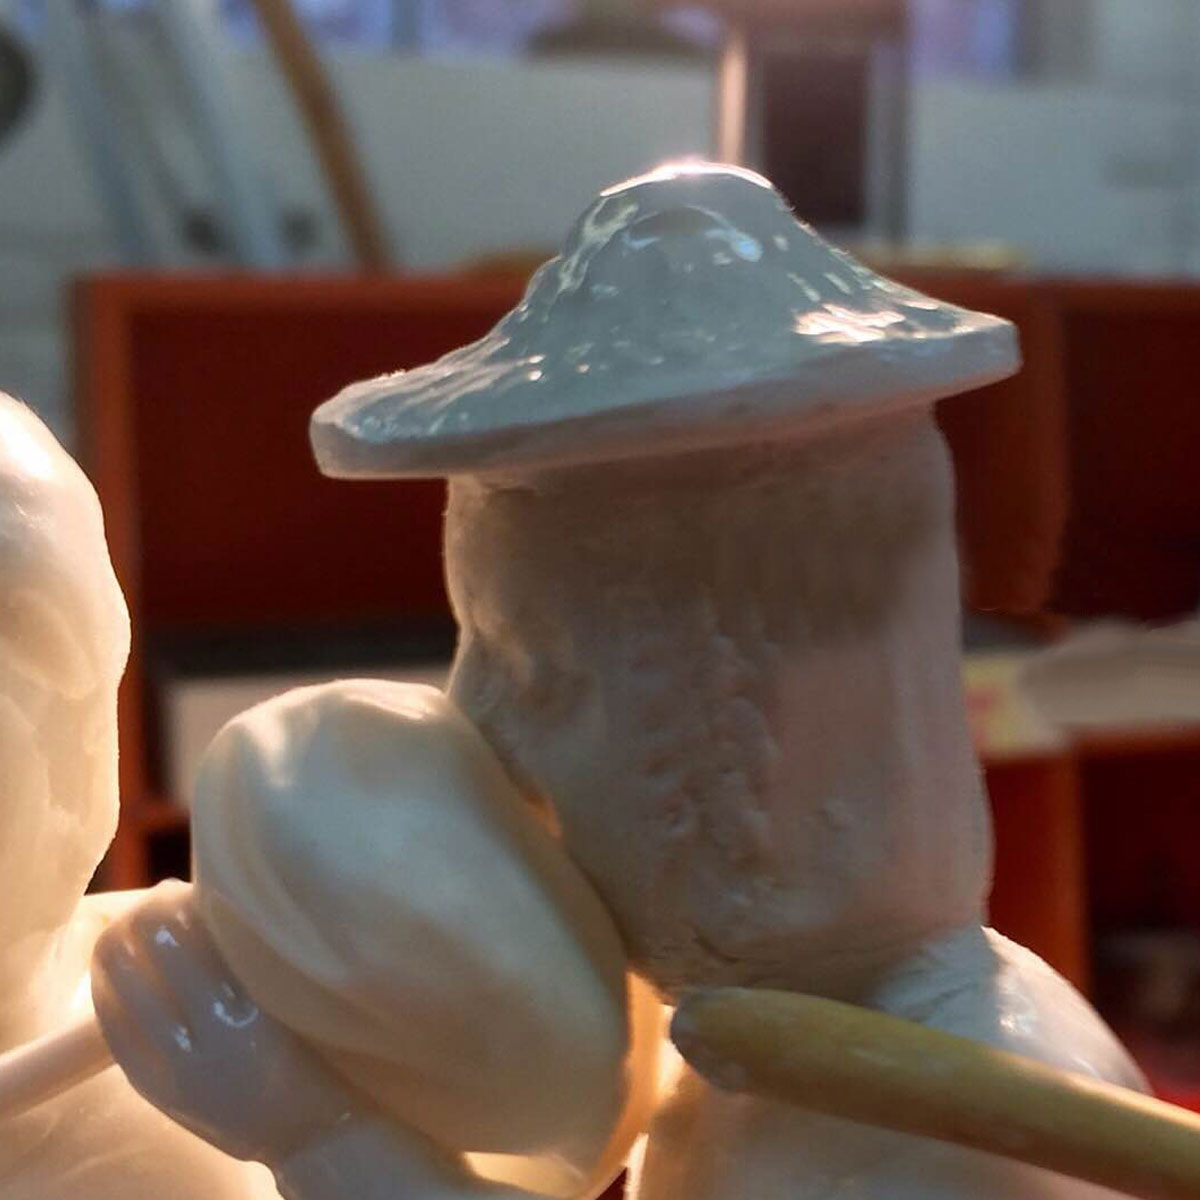 Head and hat of a white clay figure being attached together